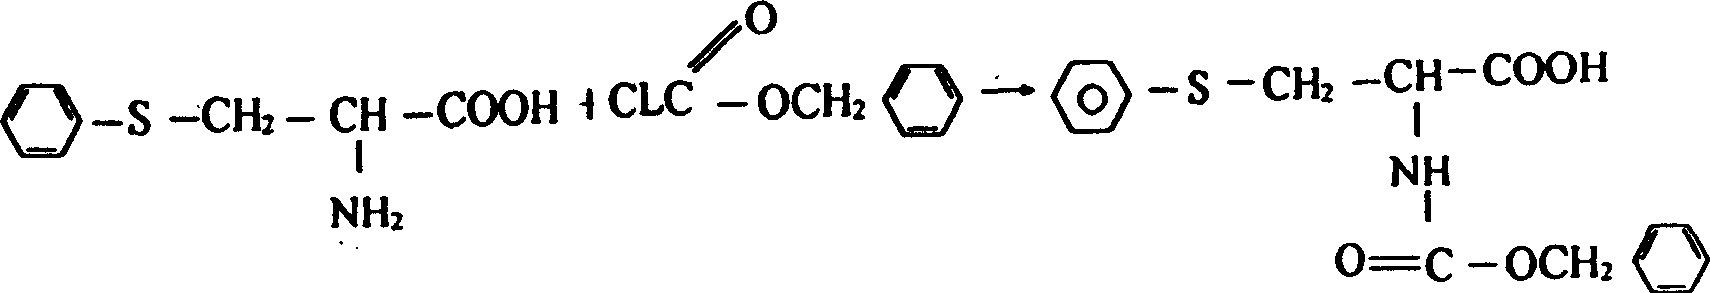 Technique for preparing N-carbobenzoxy-5 phenyl-L-cysteine